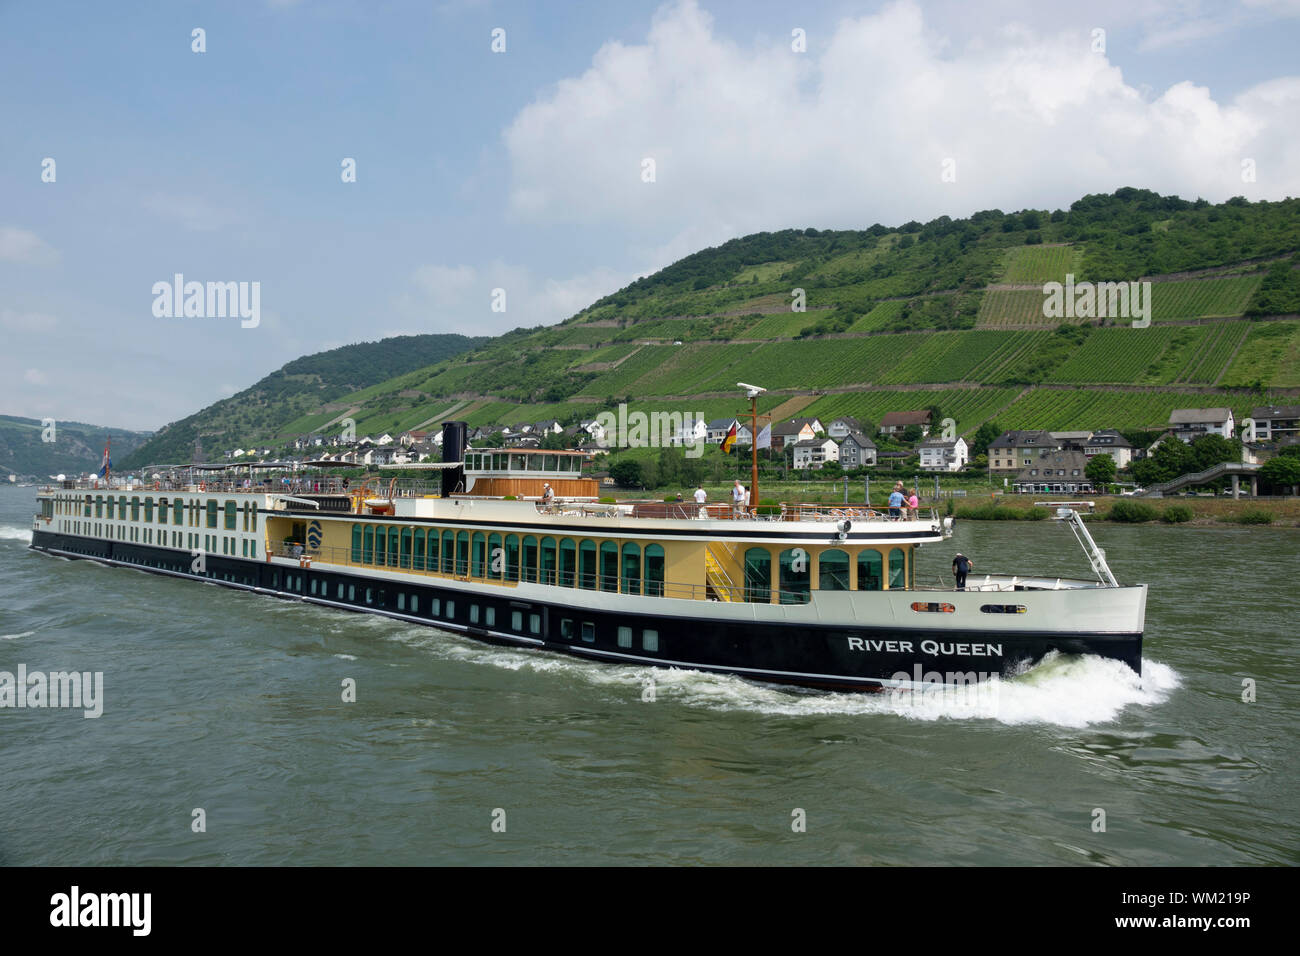 Cruise boat River Queen, River Rhine, Germany Stock Photo - Alamy